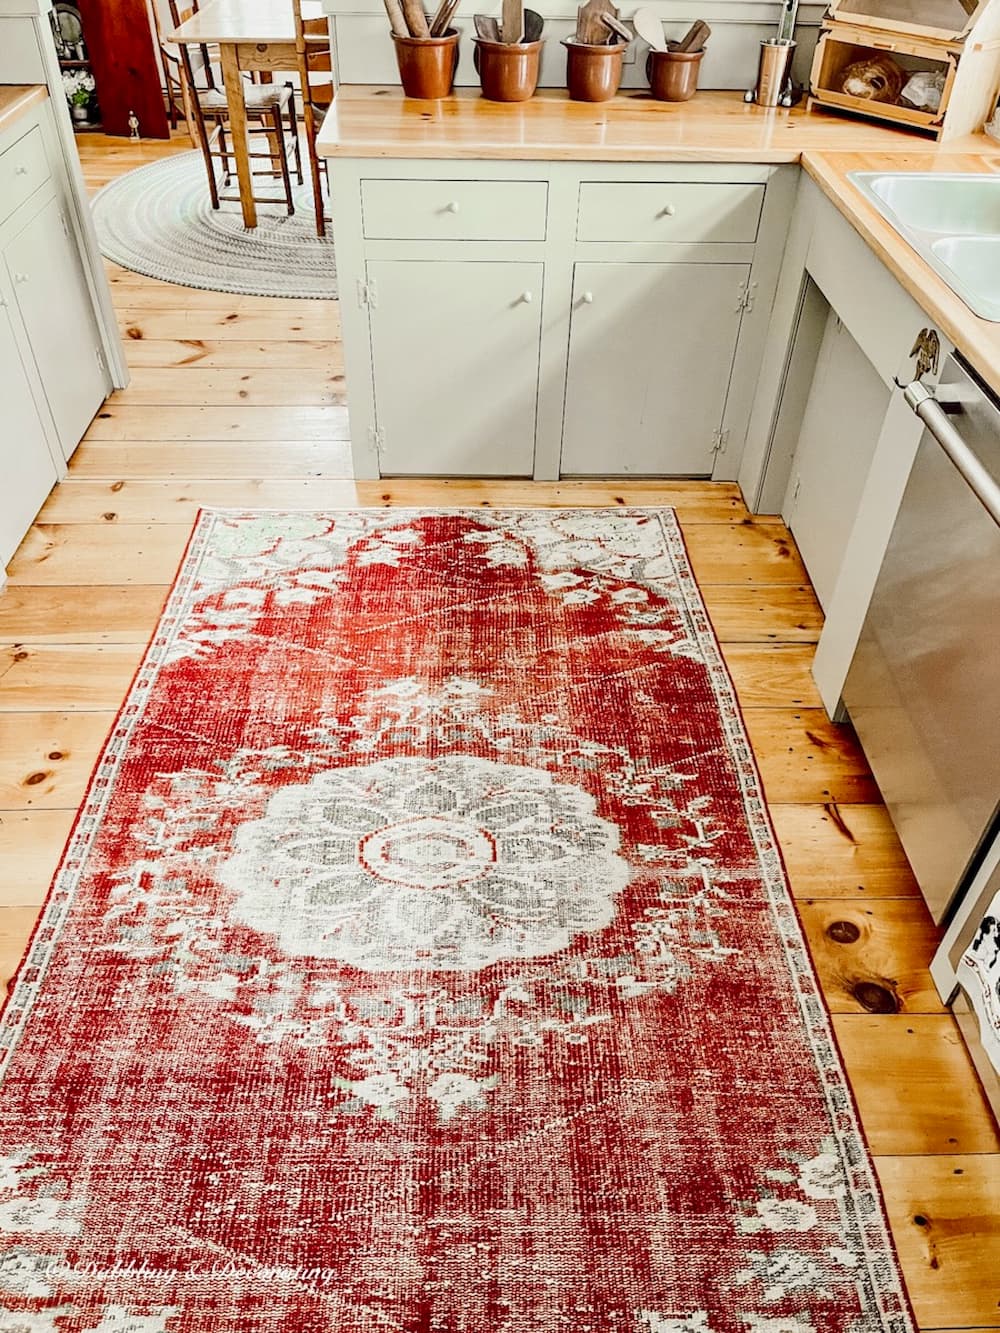 A vintage kitchen with a red rug on the floor.